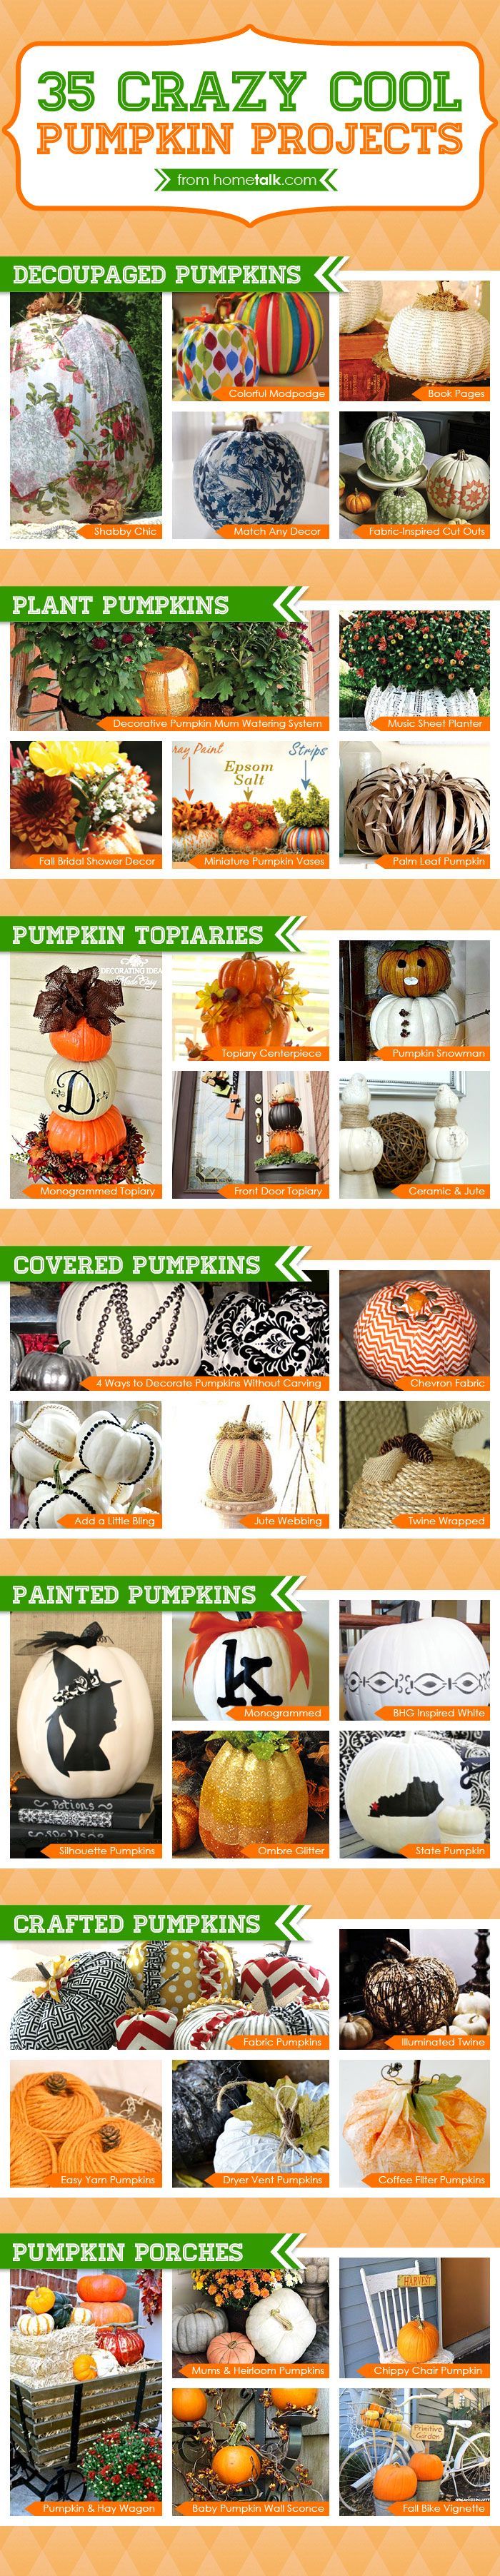 35+ crazy cool pumpkin ideas to try this fall. This is such an amazing list!